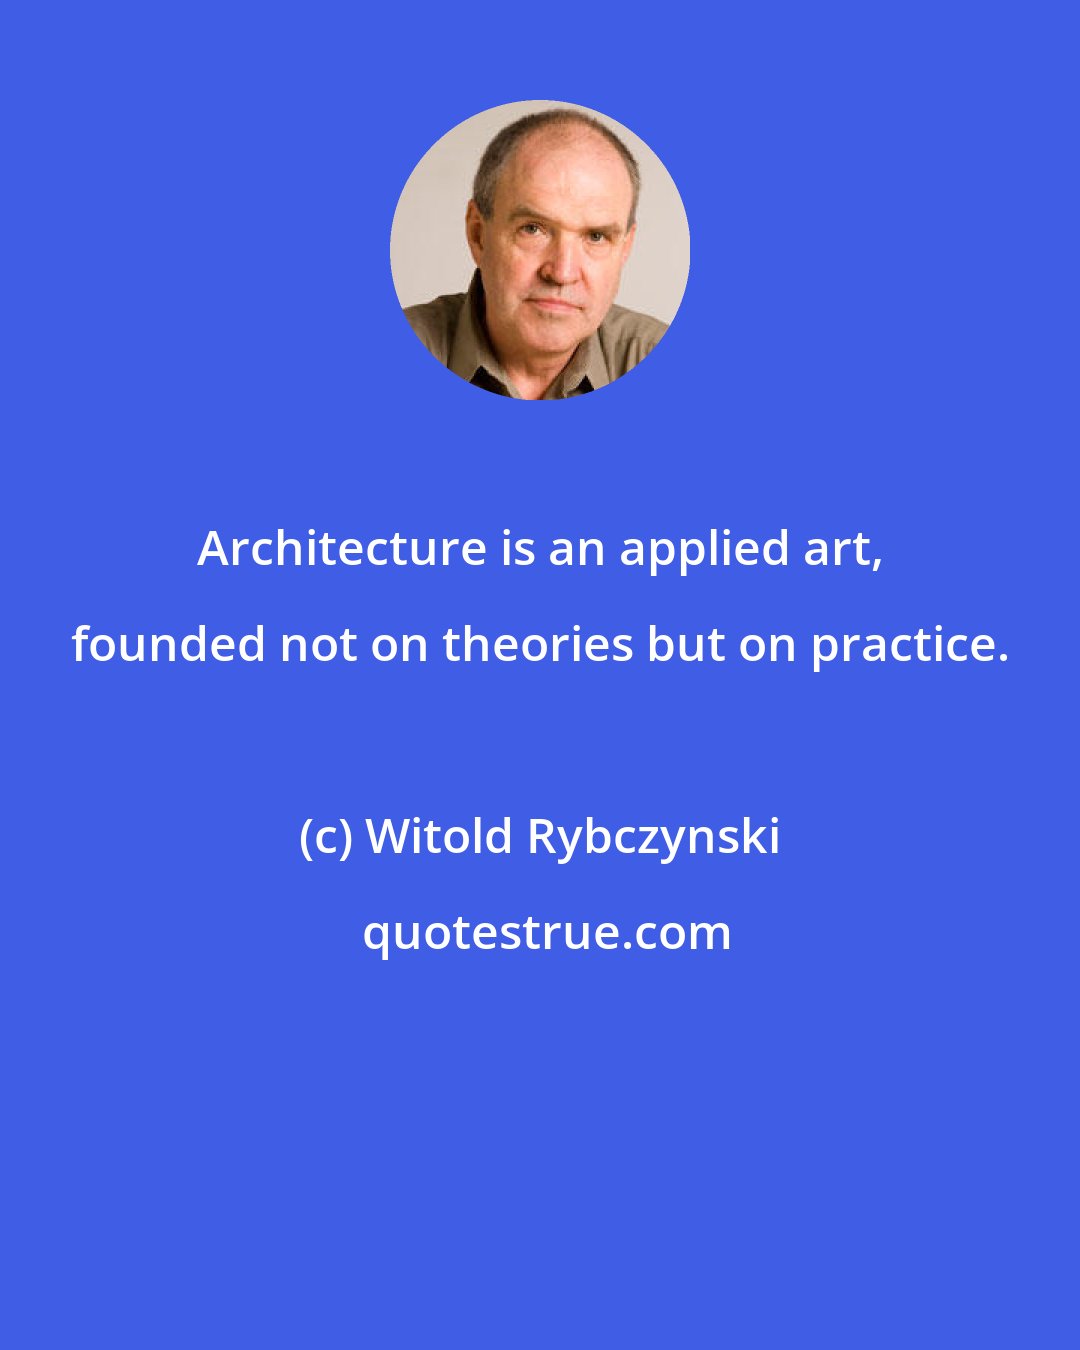 Witold Rybczynski: Architecture is an applied art, founded not on theories but on practice.